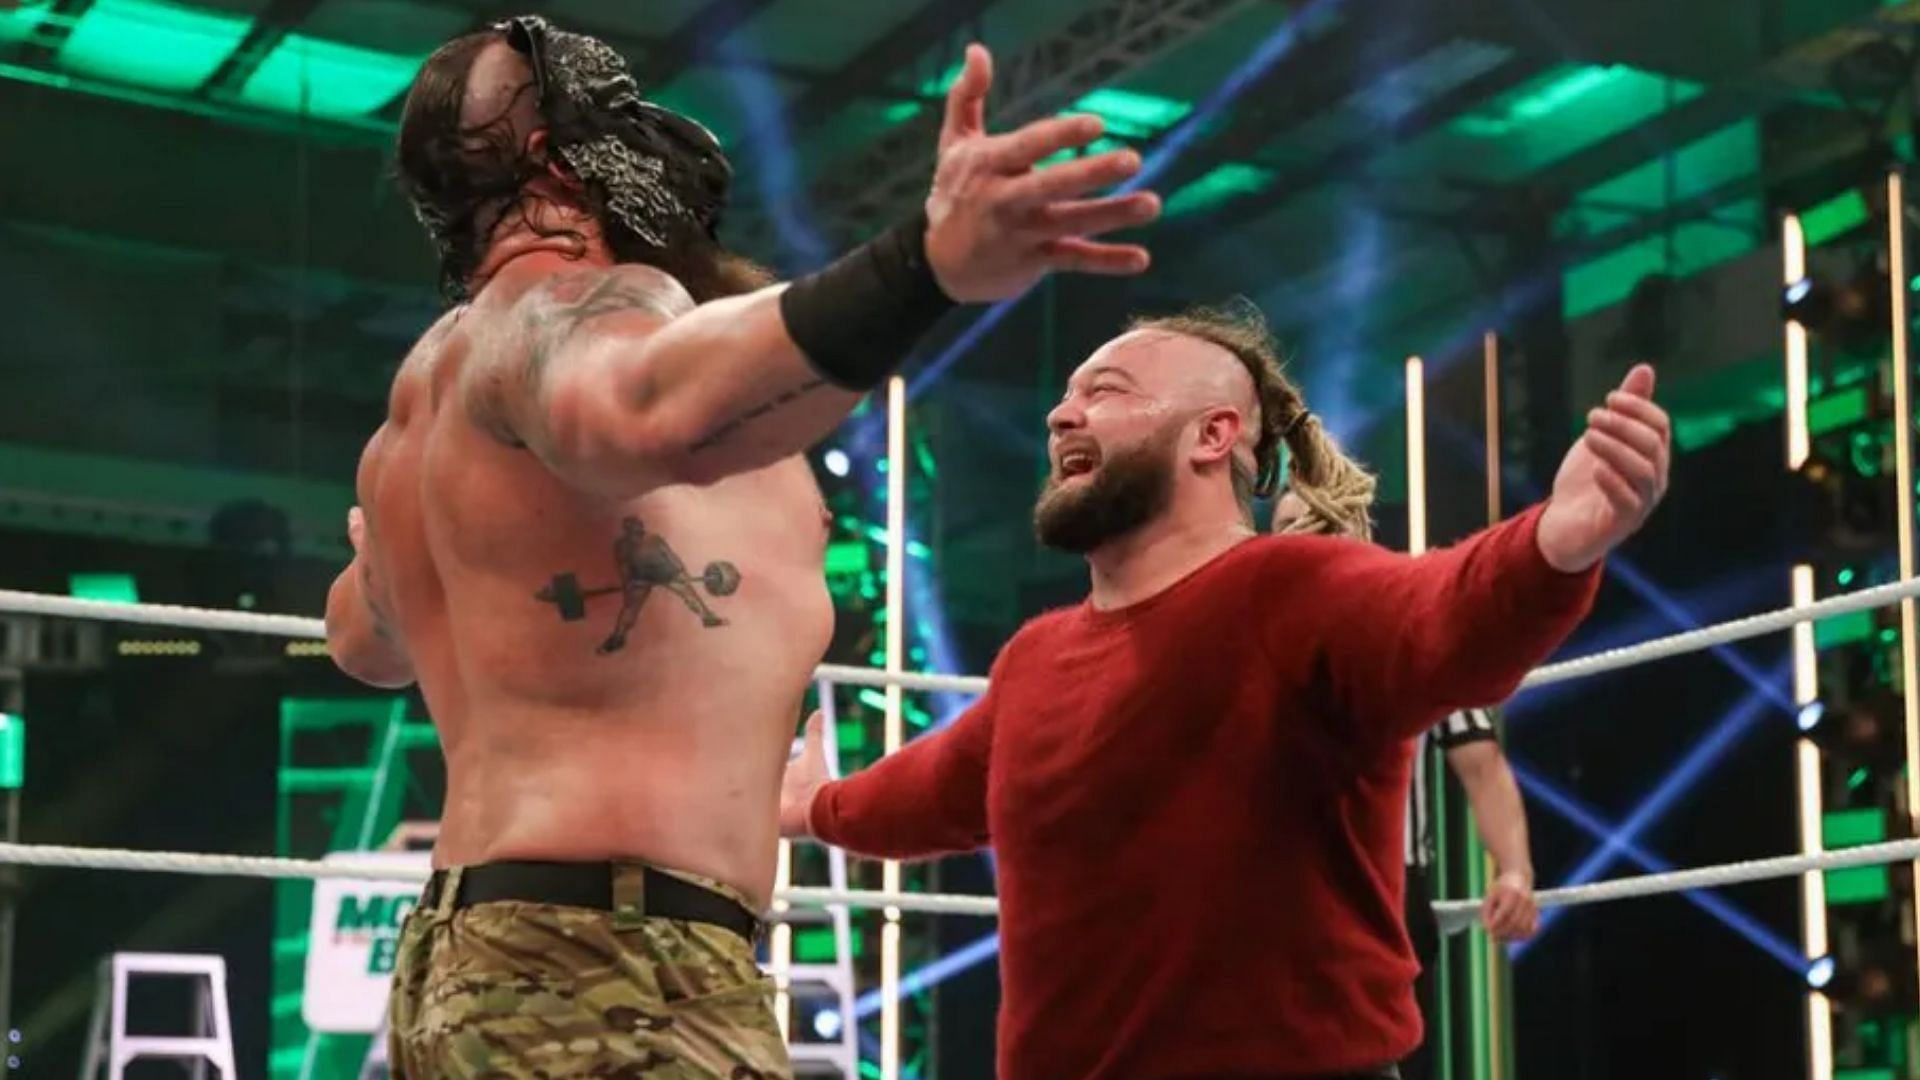 Braun Strowman and Bray Wyatt wrestled in 2020 for the WWE Universal Title